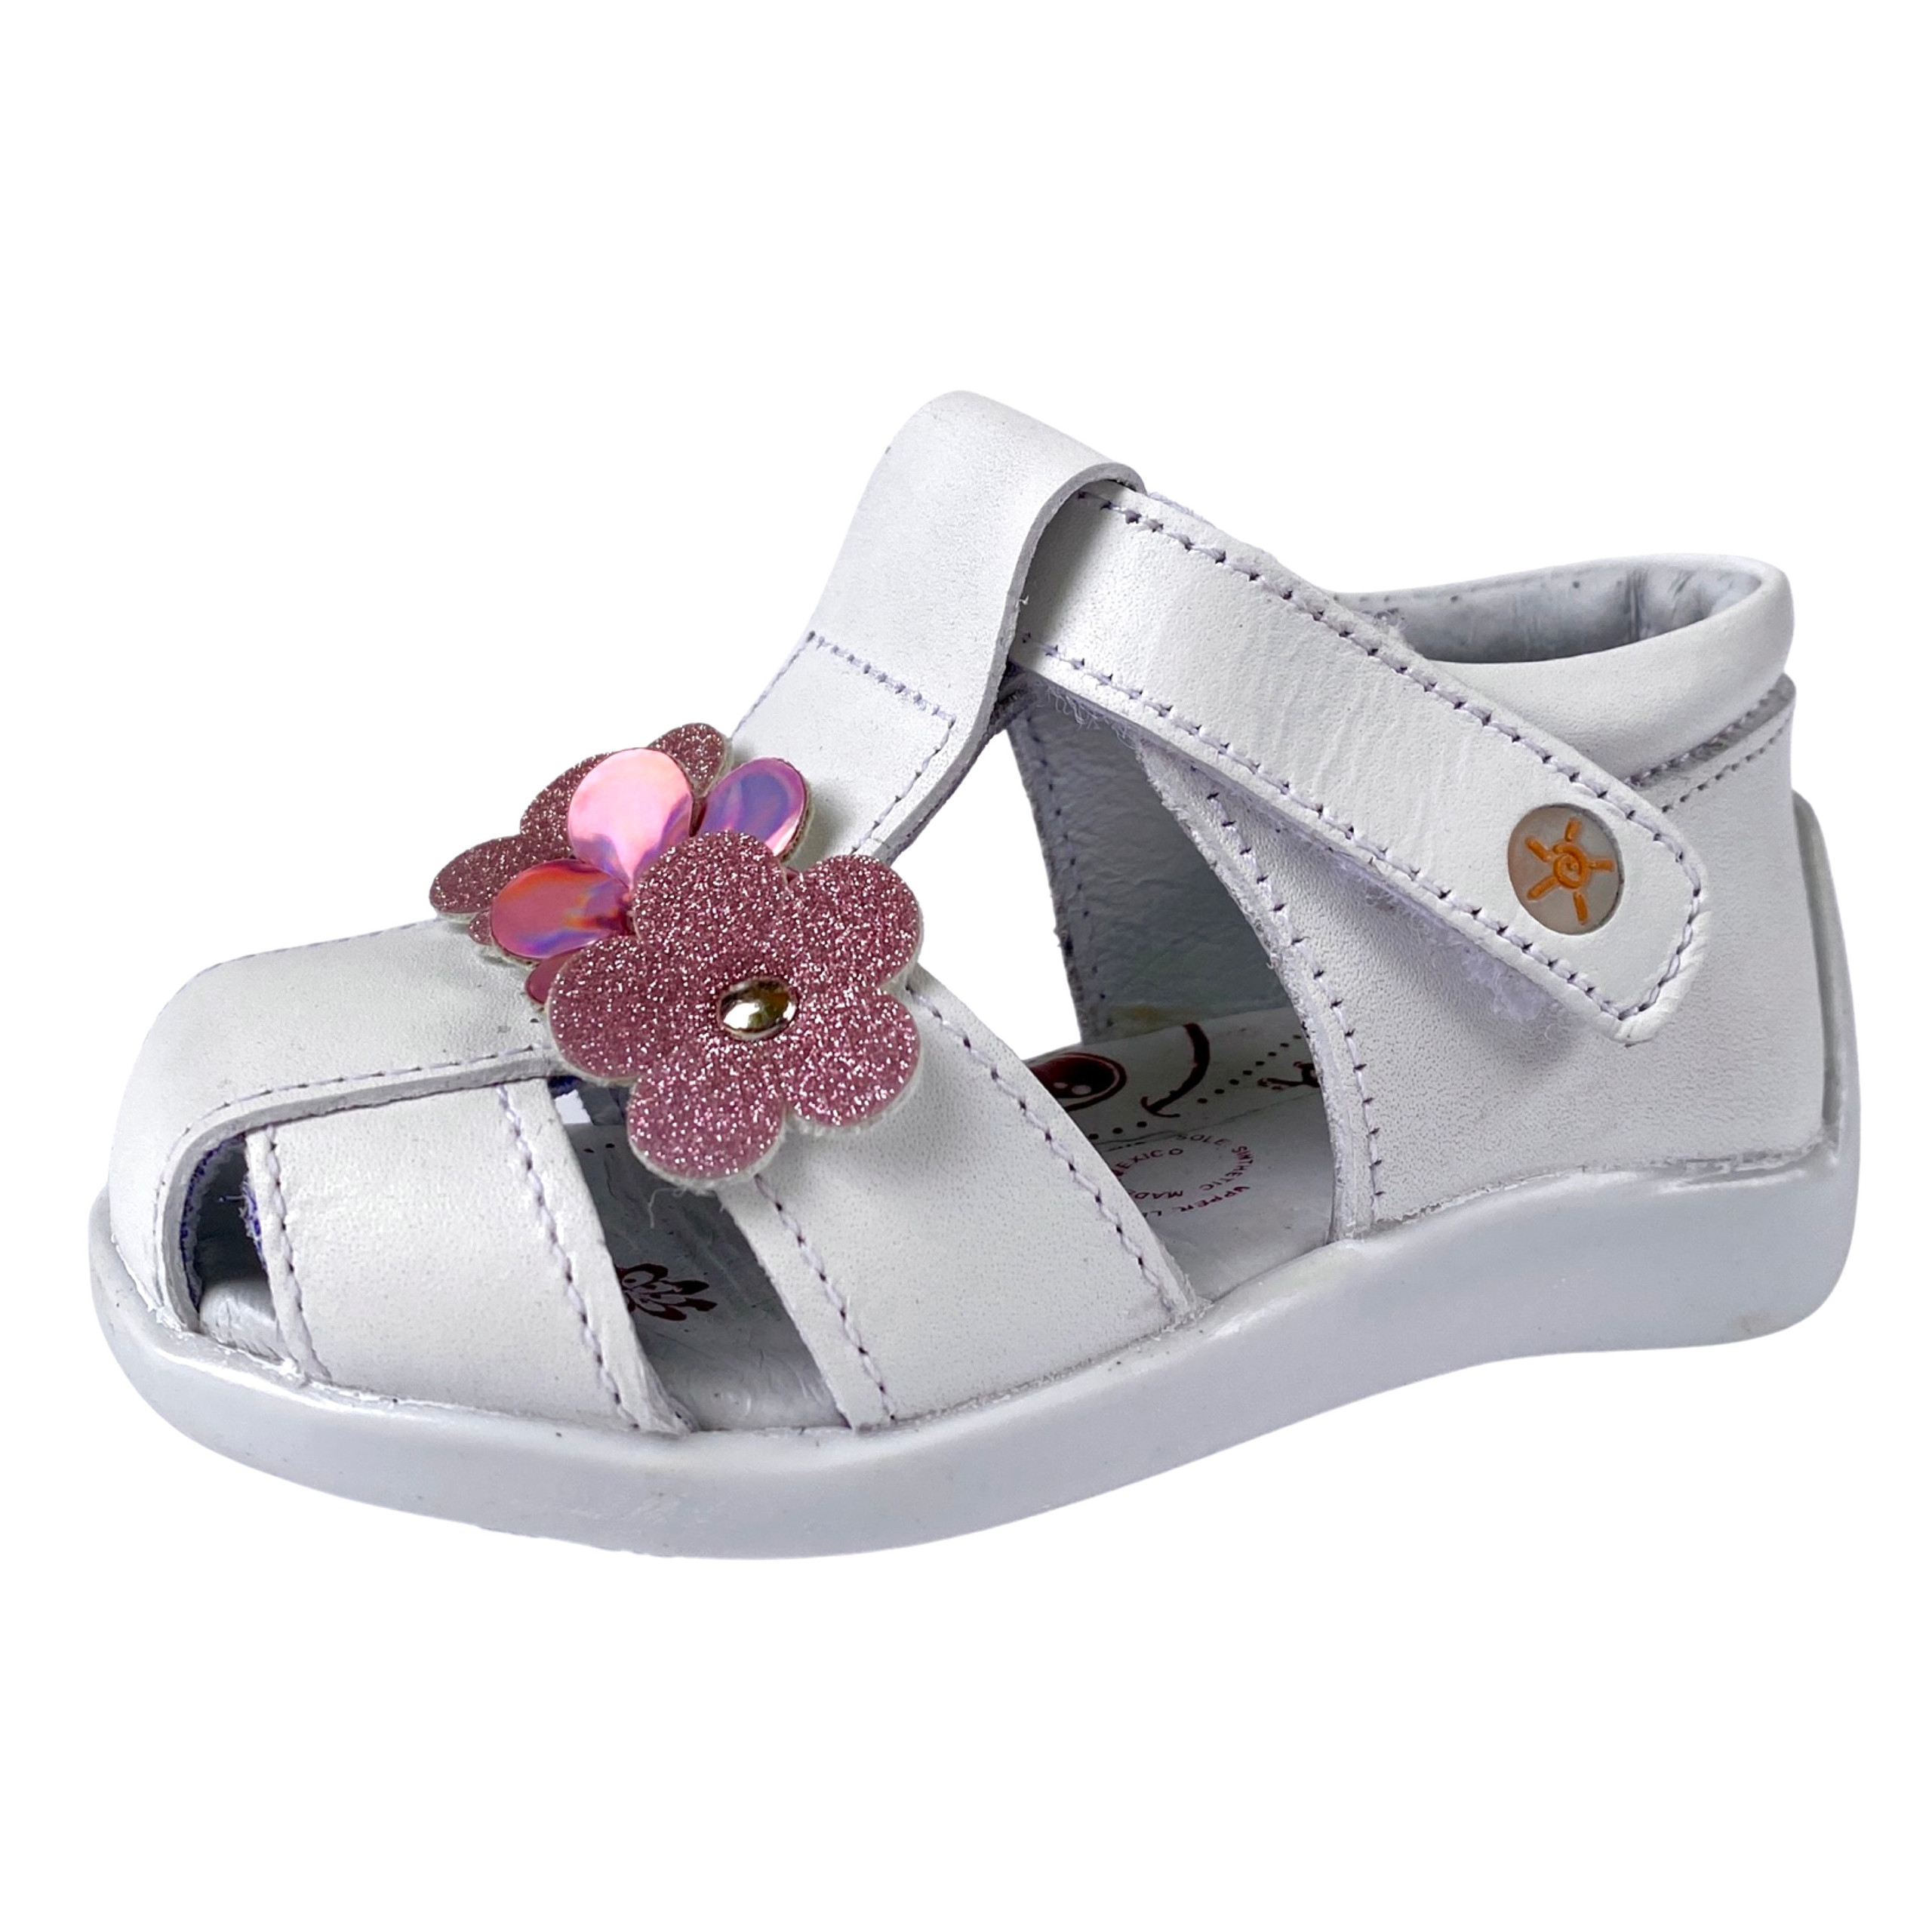 Tottering Toddlers / Baby and Toddler First Step Shoes